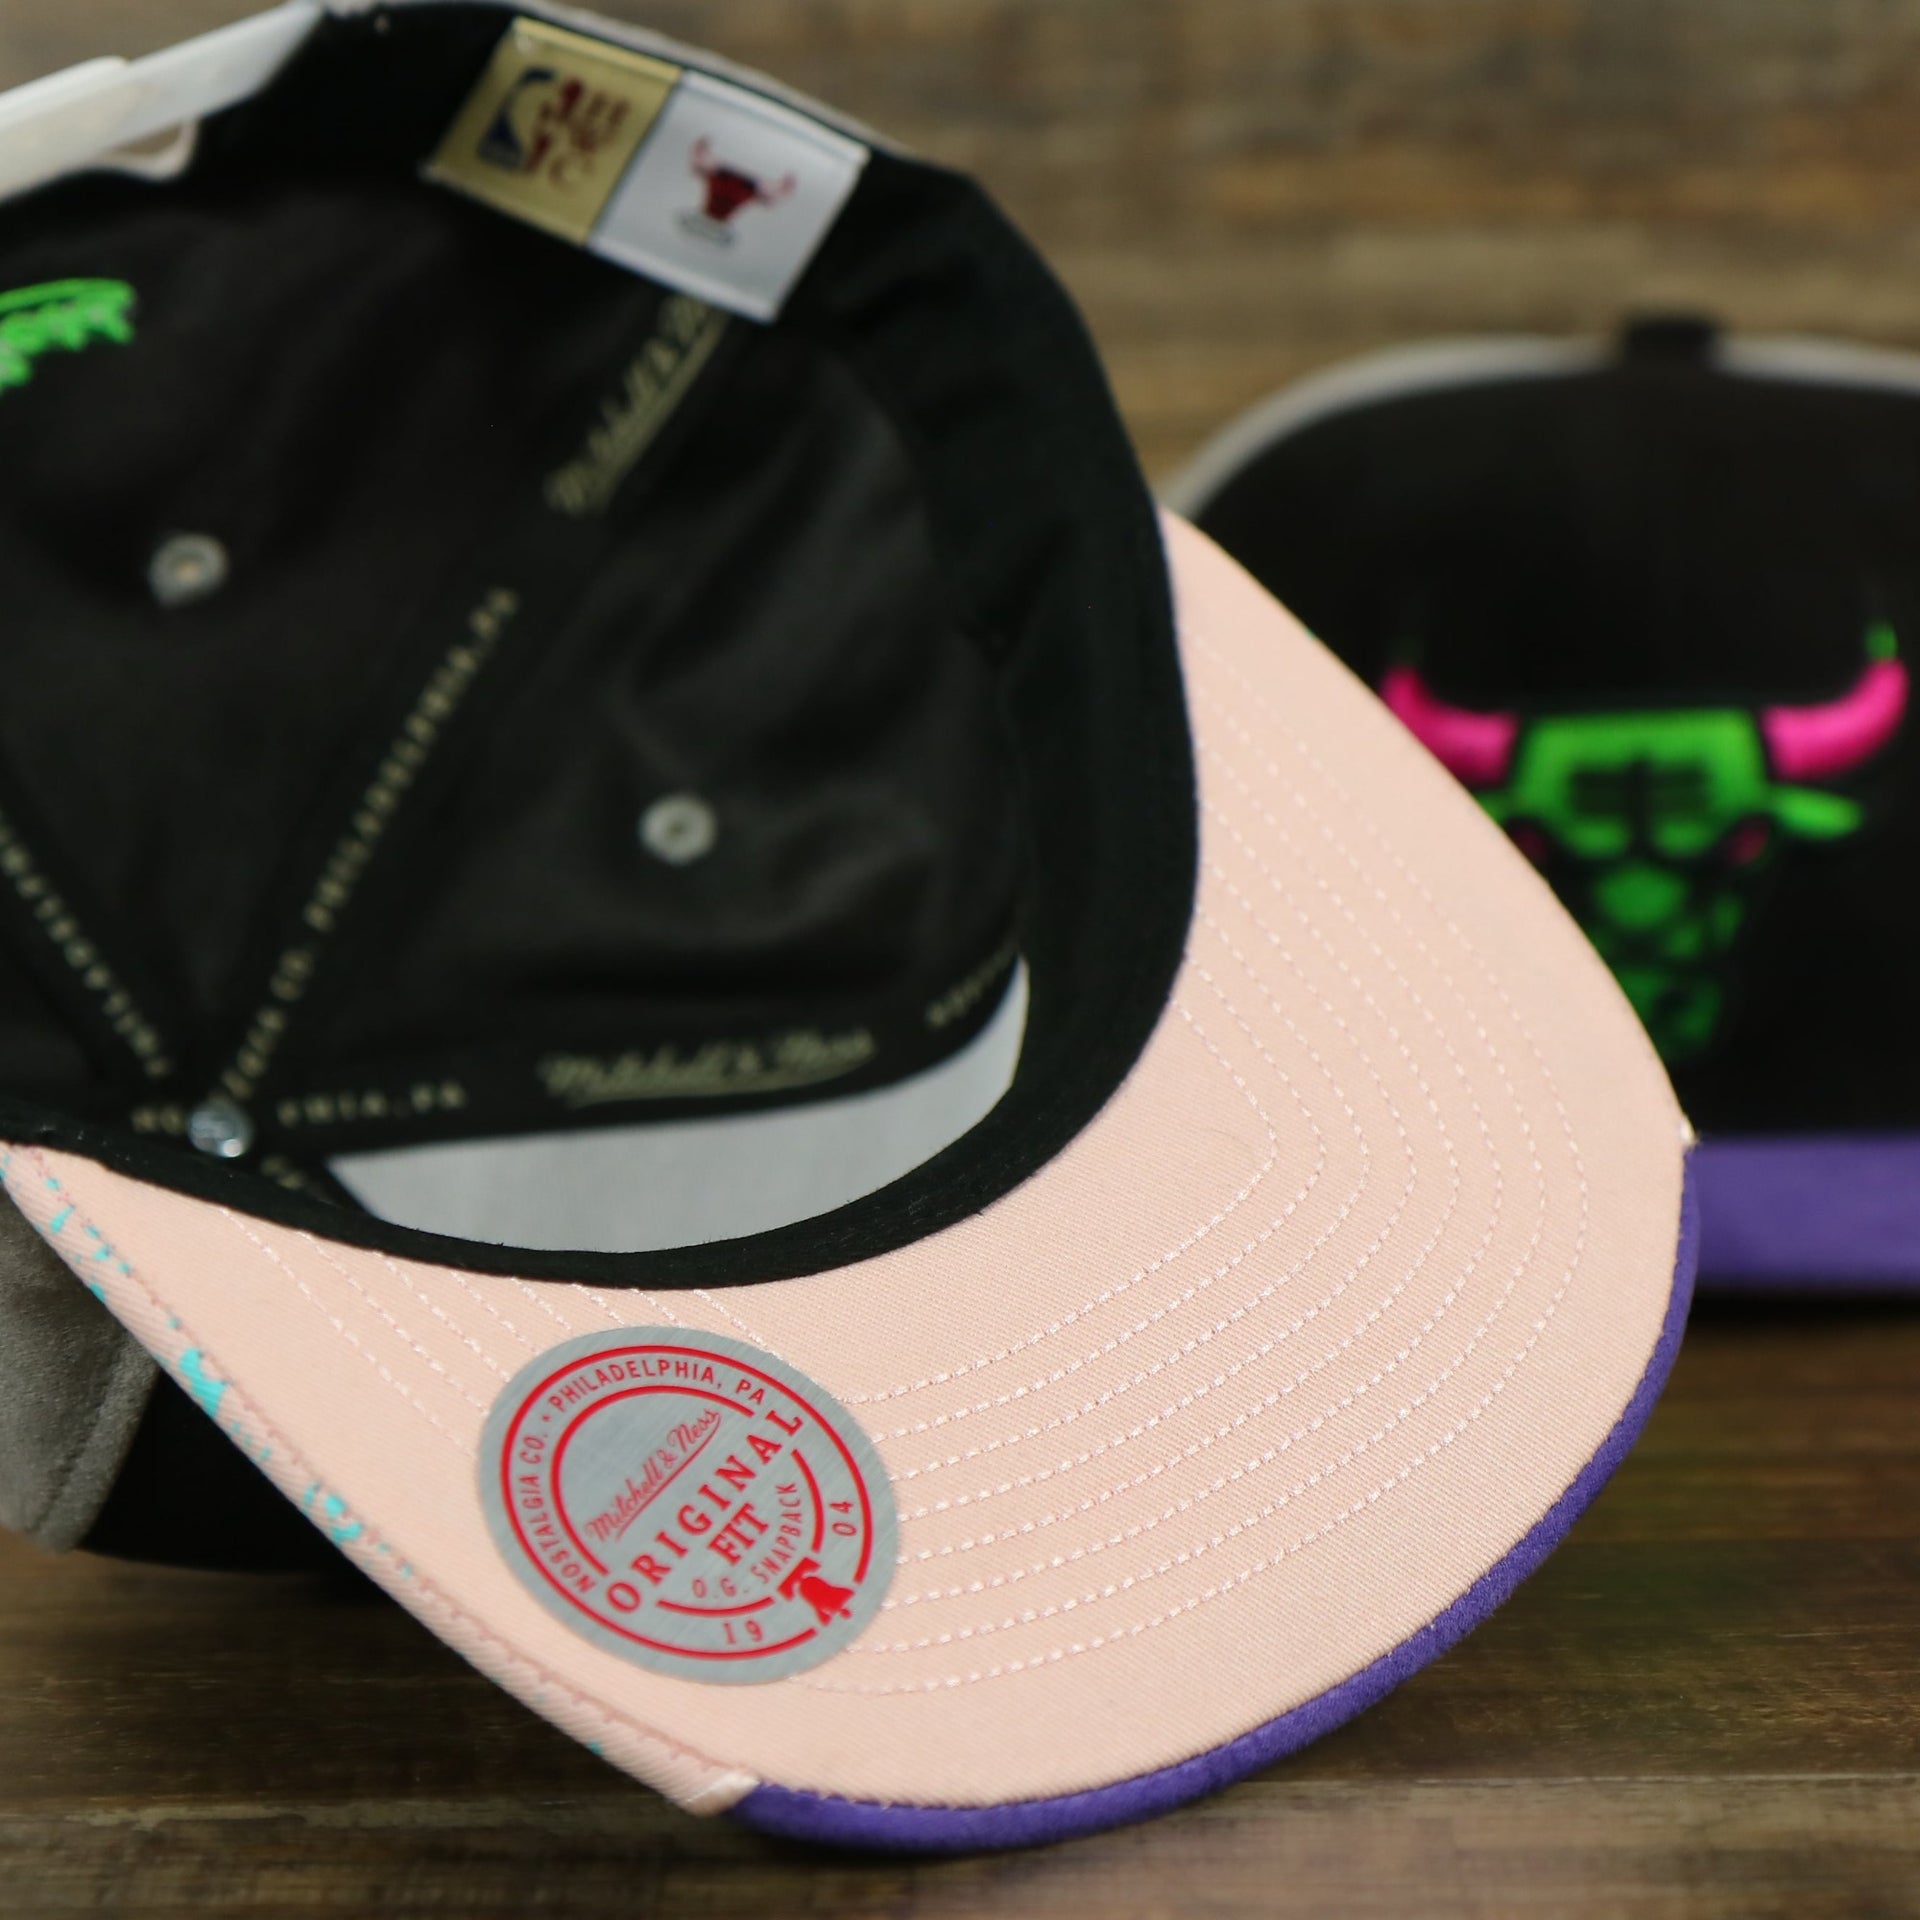 Light pink under visor of the Chicago Bulls “NBA Day 5” Bel Air 5s Matching Snapback Hat | Snapback to match Bel Air 5s